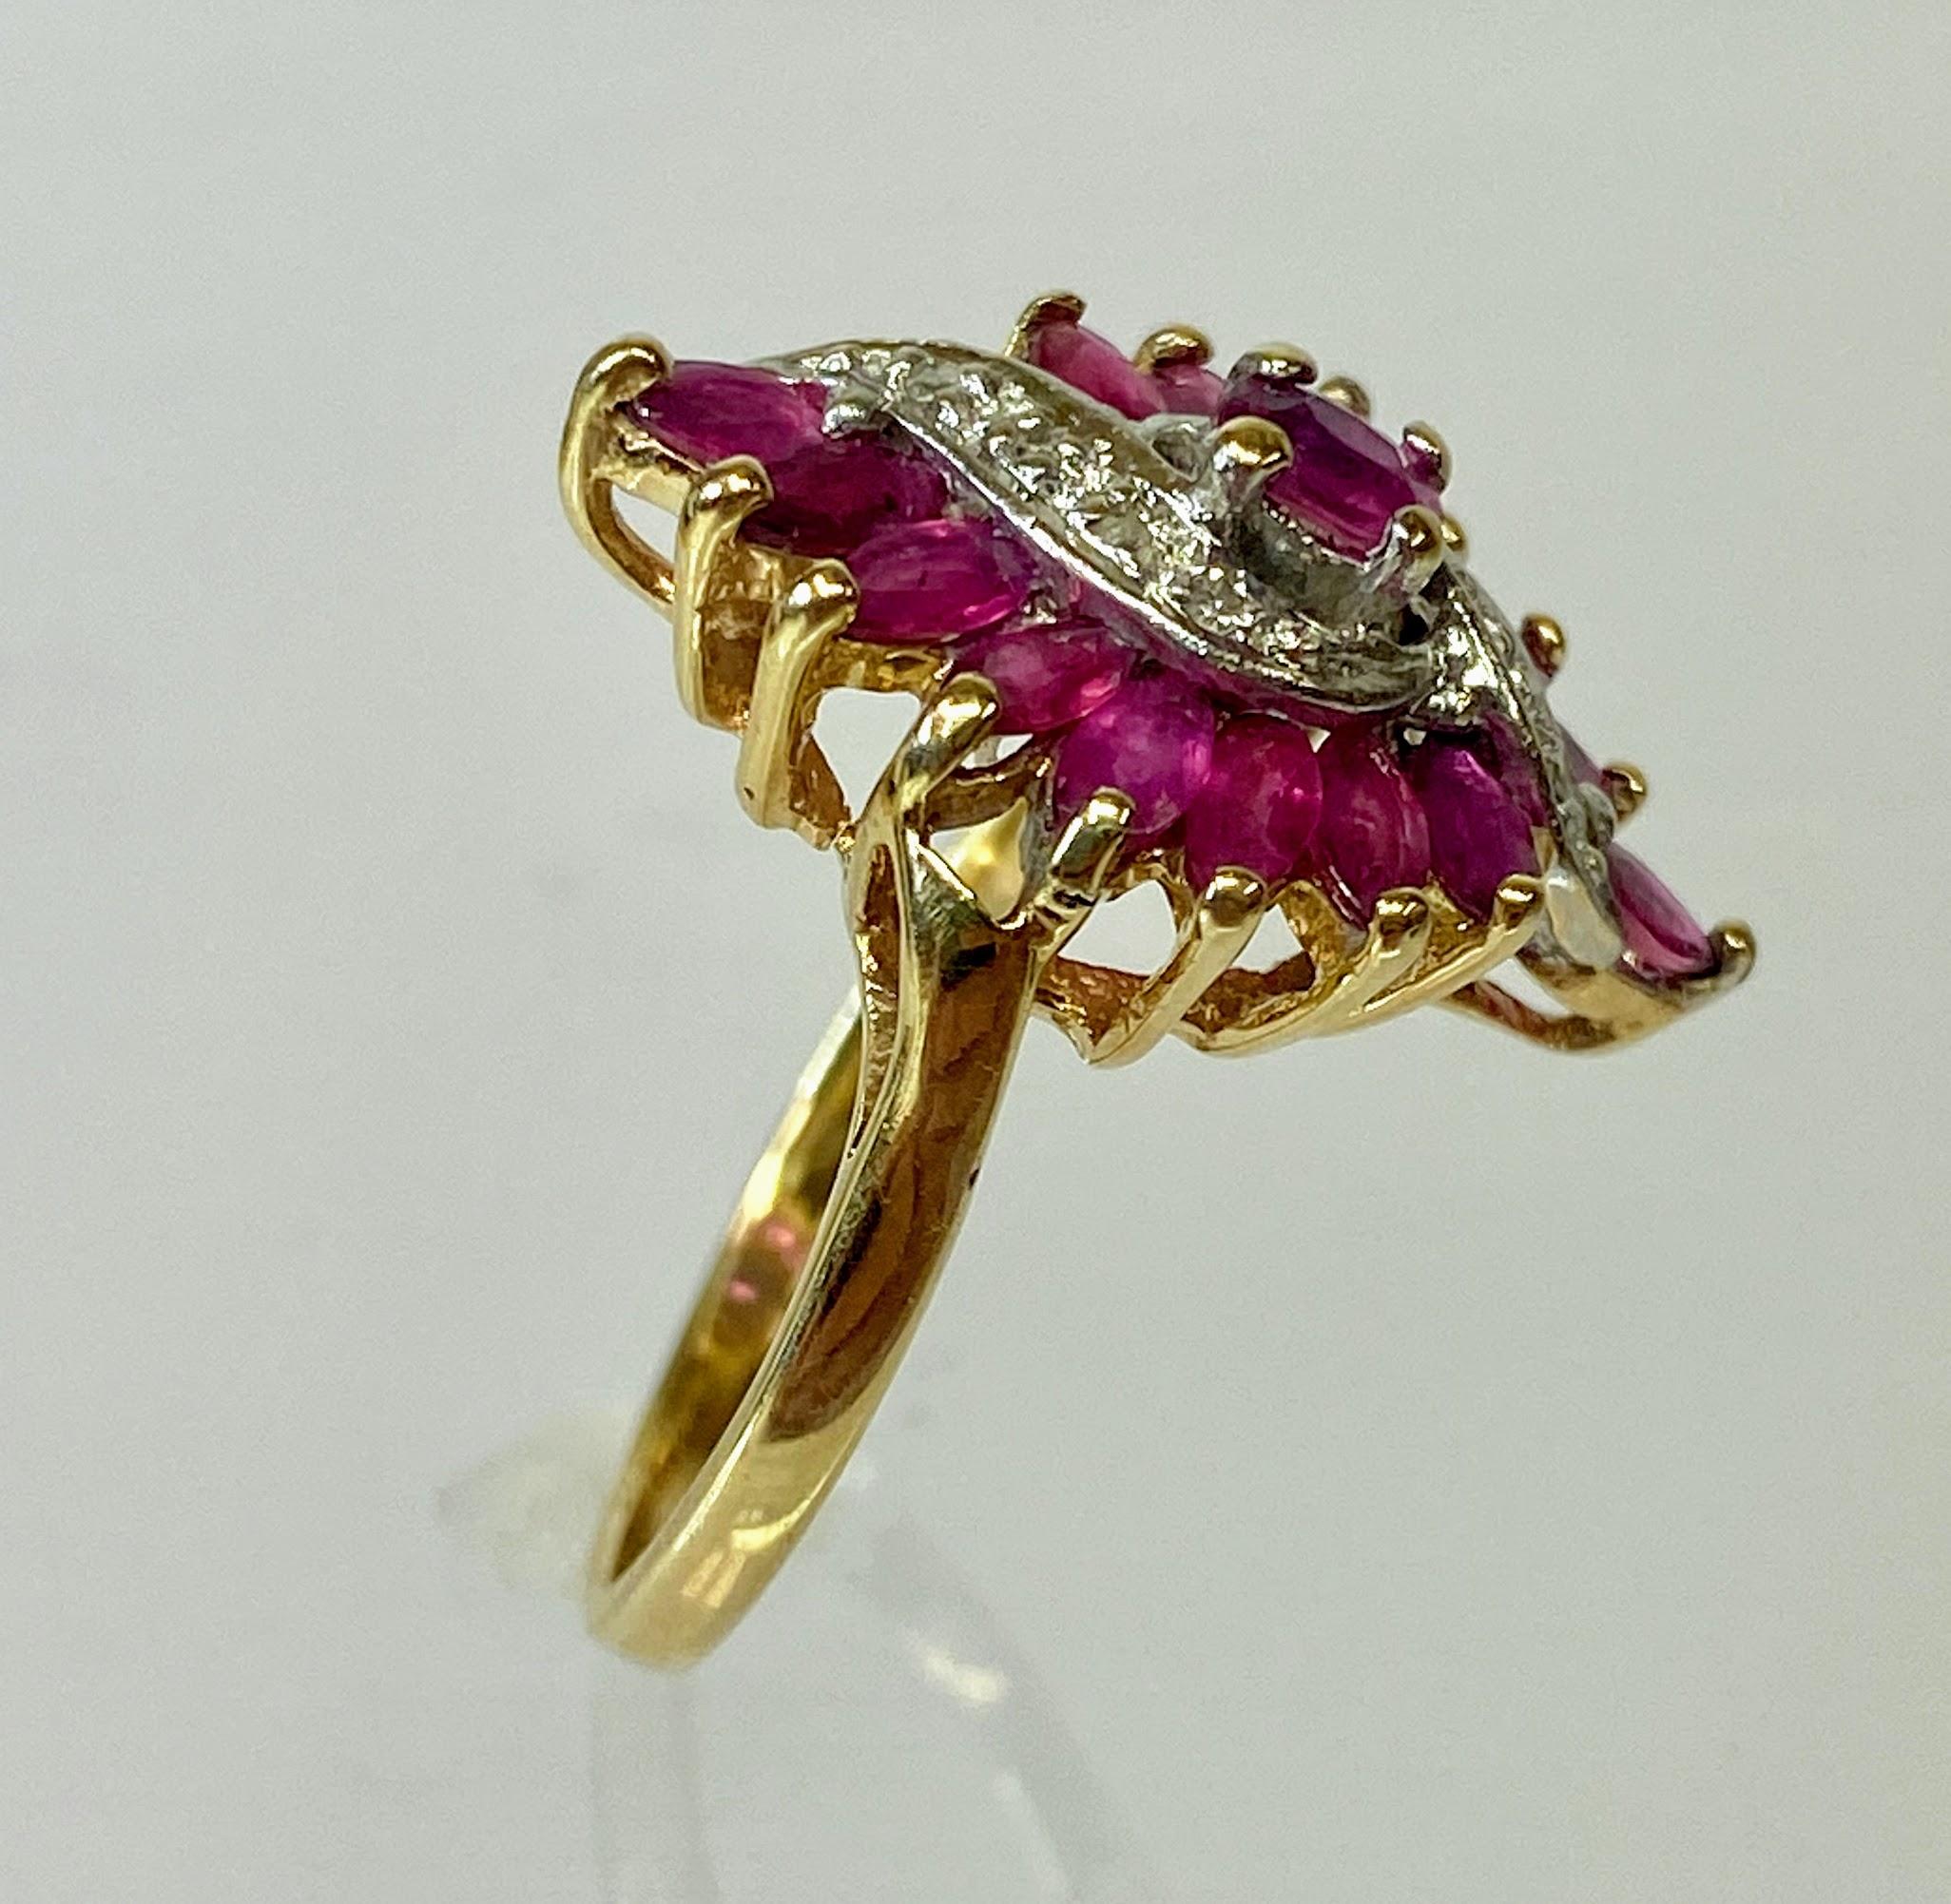 10K Yellow Gold Marquise Ruby Diamond Waterfall Ballerina Cocktail Ring Size 6 In Good Condition For Sale In San Jacinto, CA